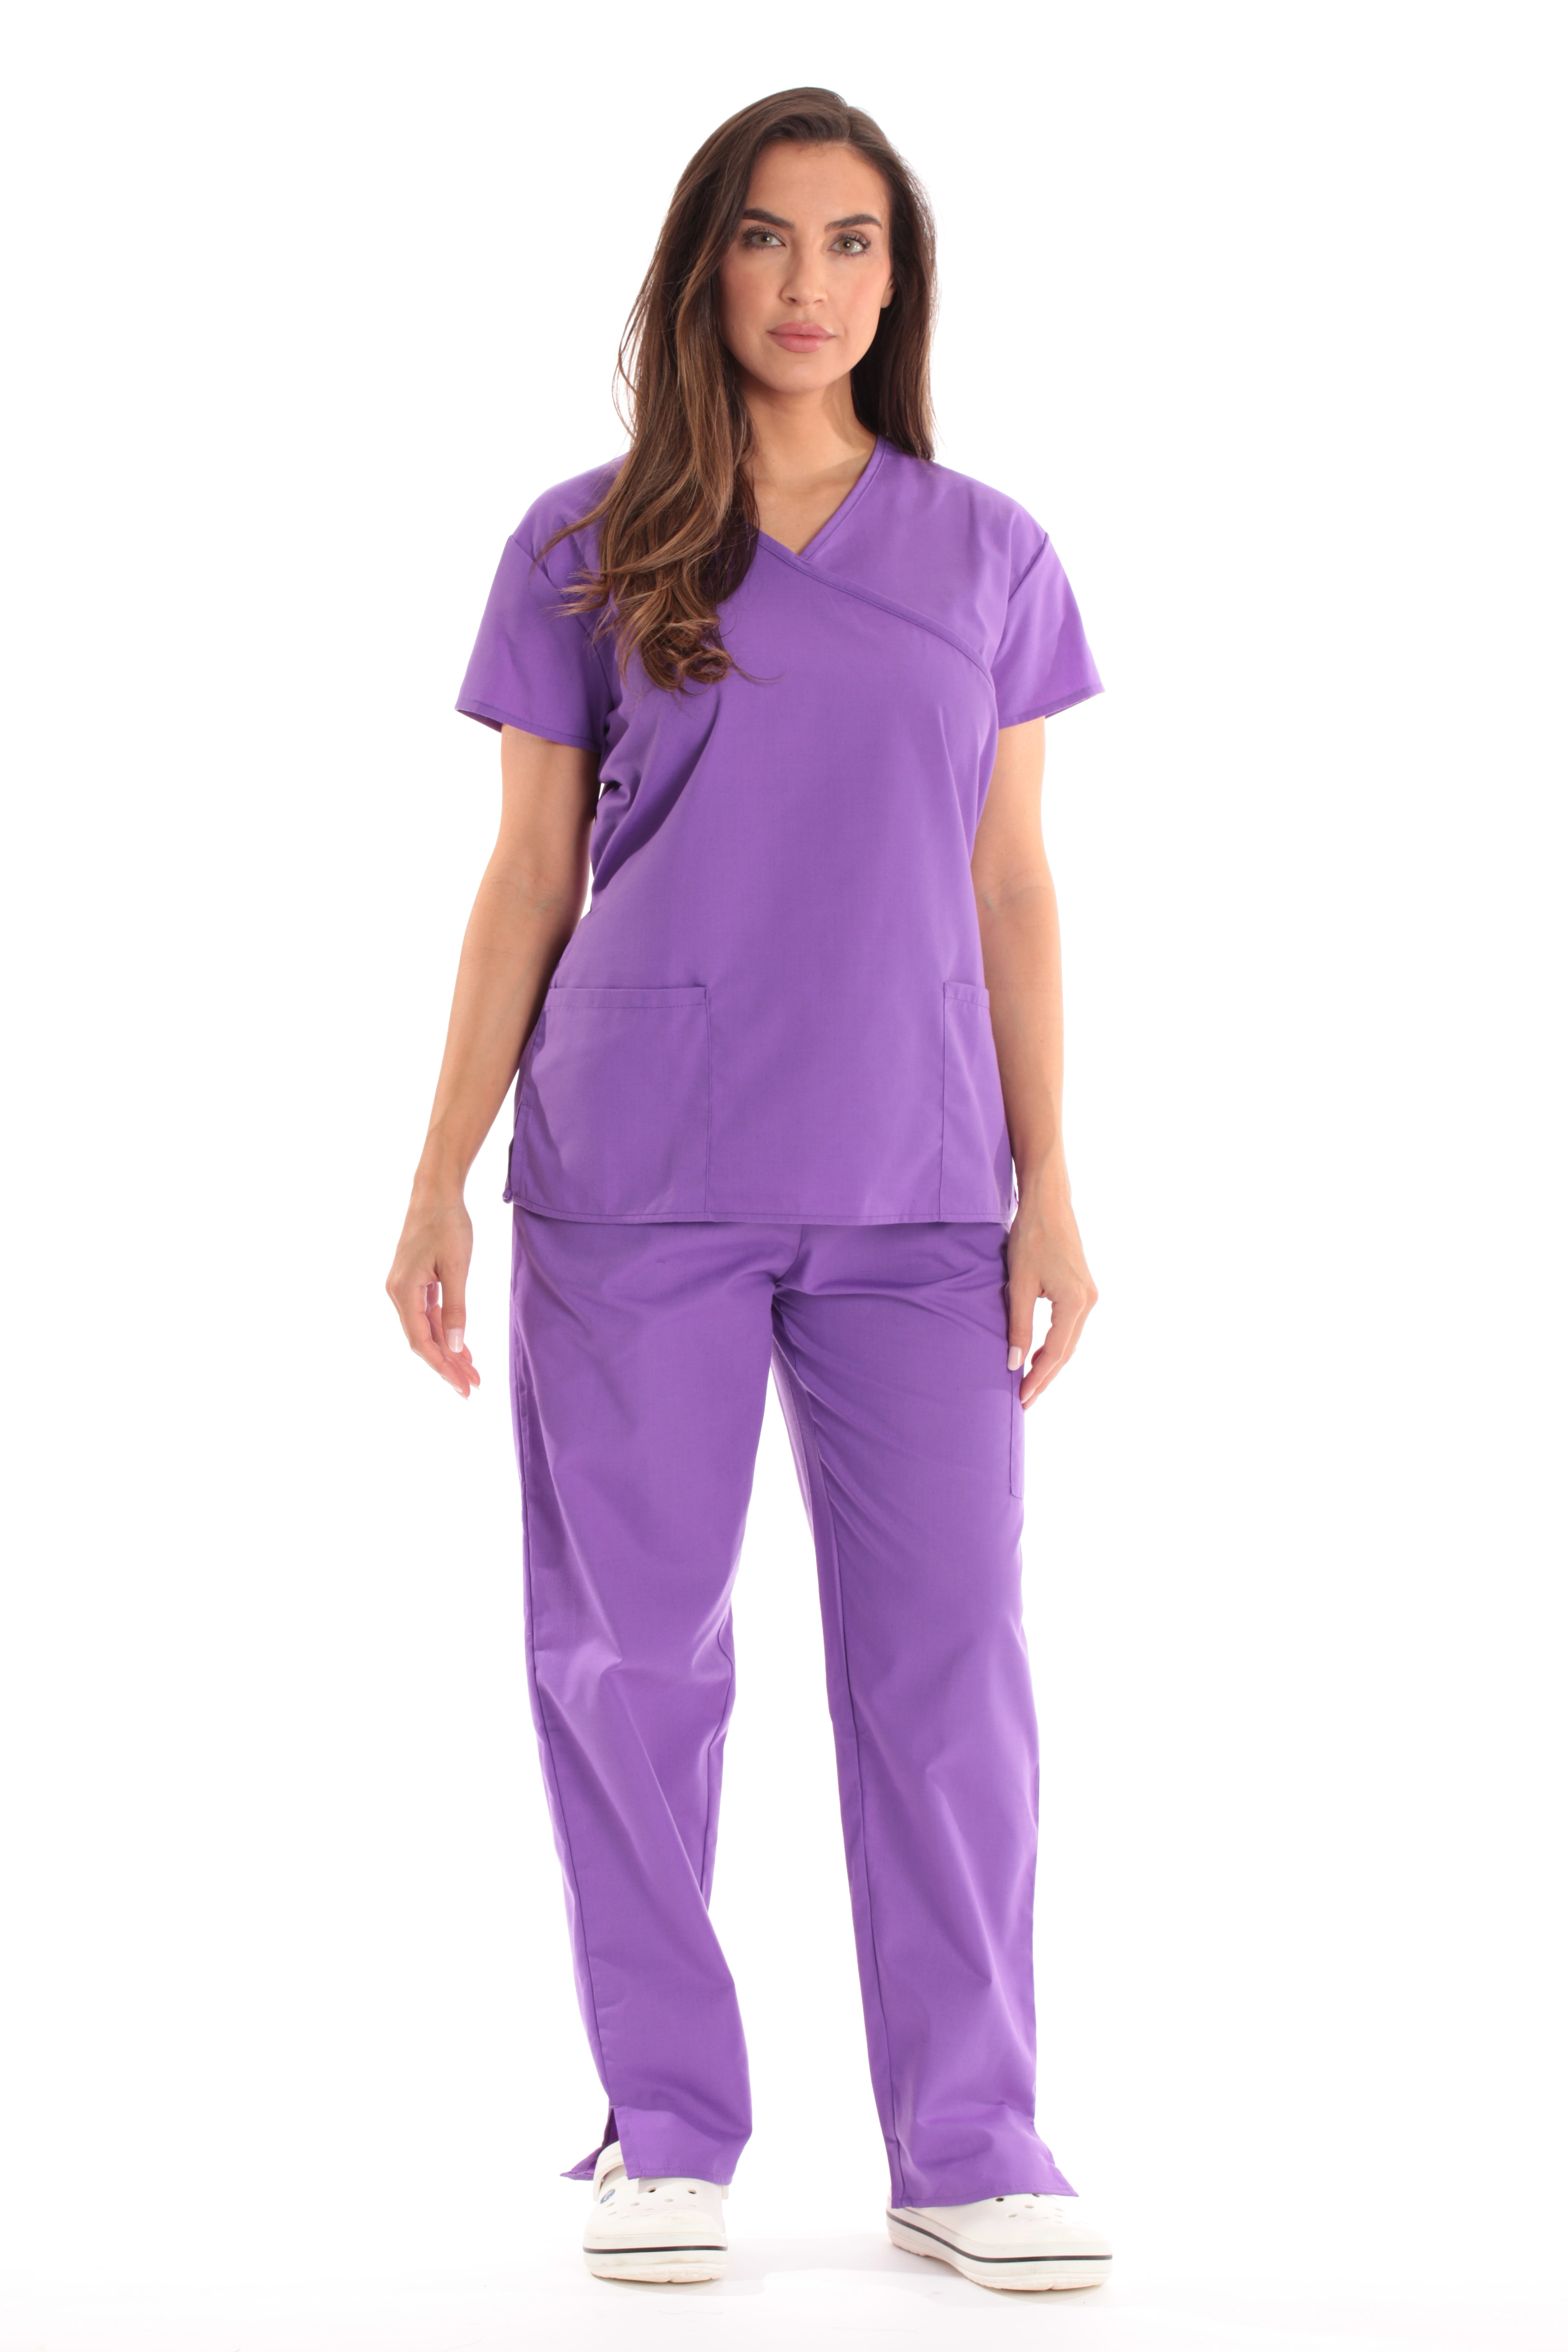 Just Love Women's Medical Scrub Sets - Mock Wrap Scrubs with Comfortable  Functionality (Jade With Jade Trim, Medium) 